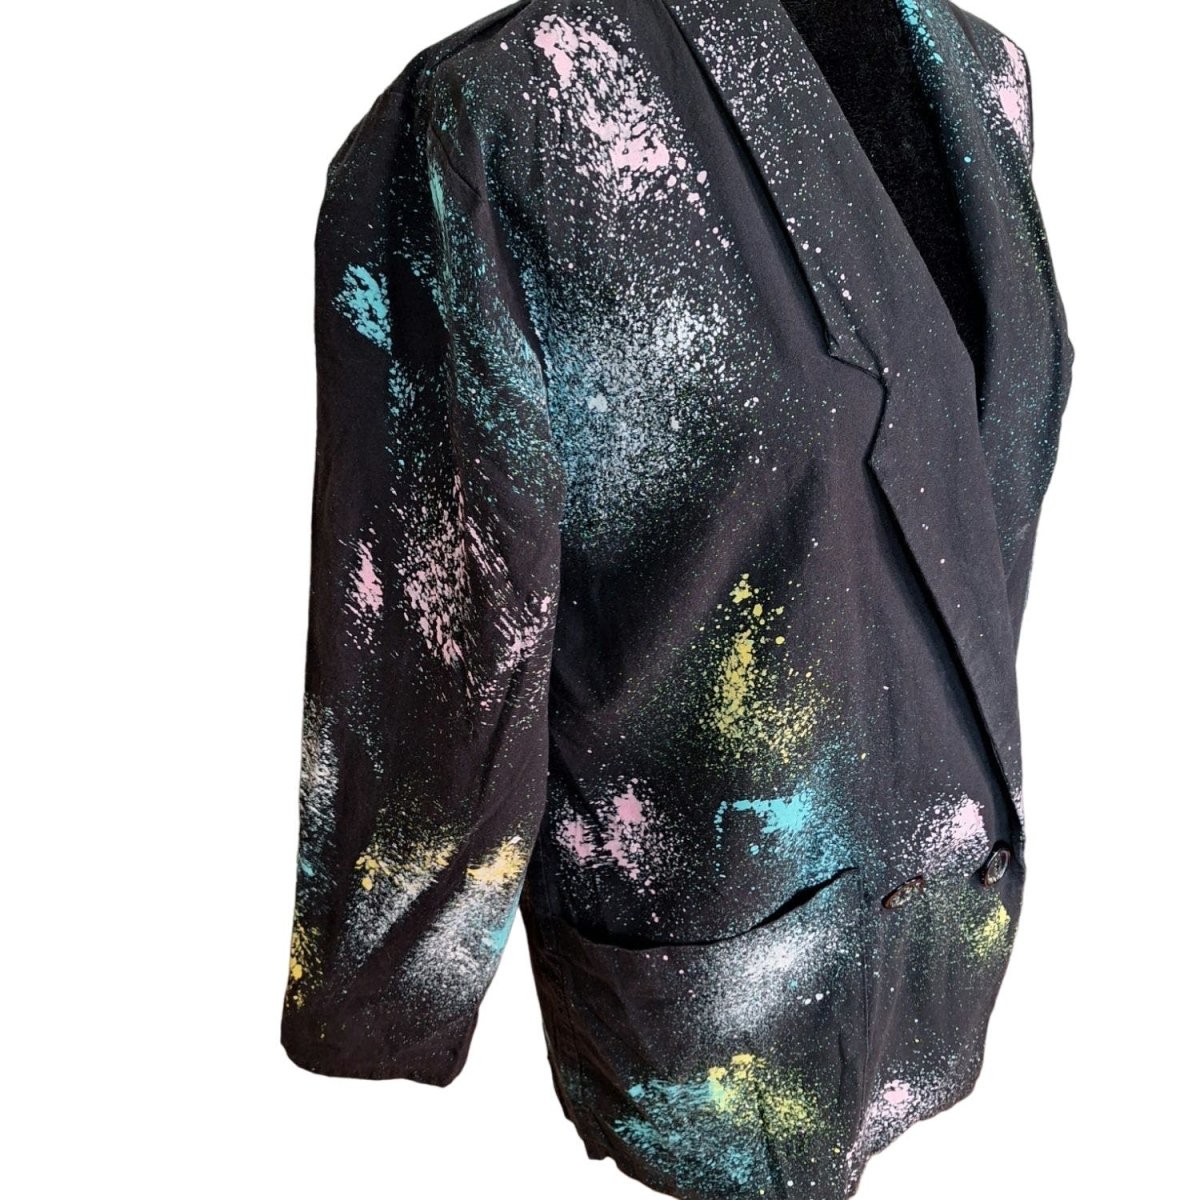 Vintage 80s Cotton Double Breasted Paint Splatter Blazer Women Size Small to Medium - themallvintage The Mall Vintage